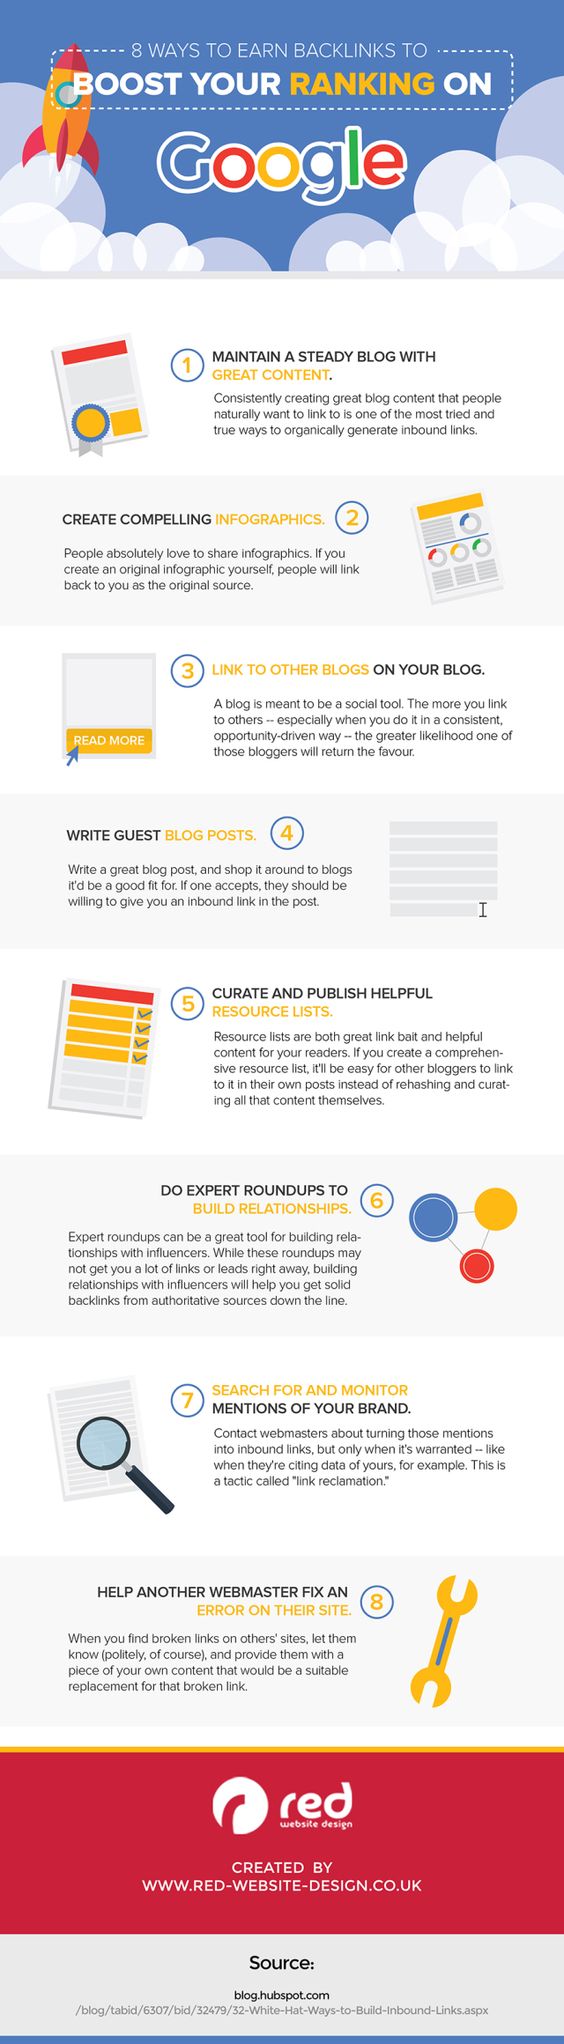 SEO Tips: 8 Ways To Earn Backlinks That Boost Your Ranking On Google #Infographic